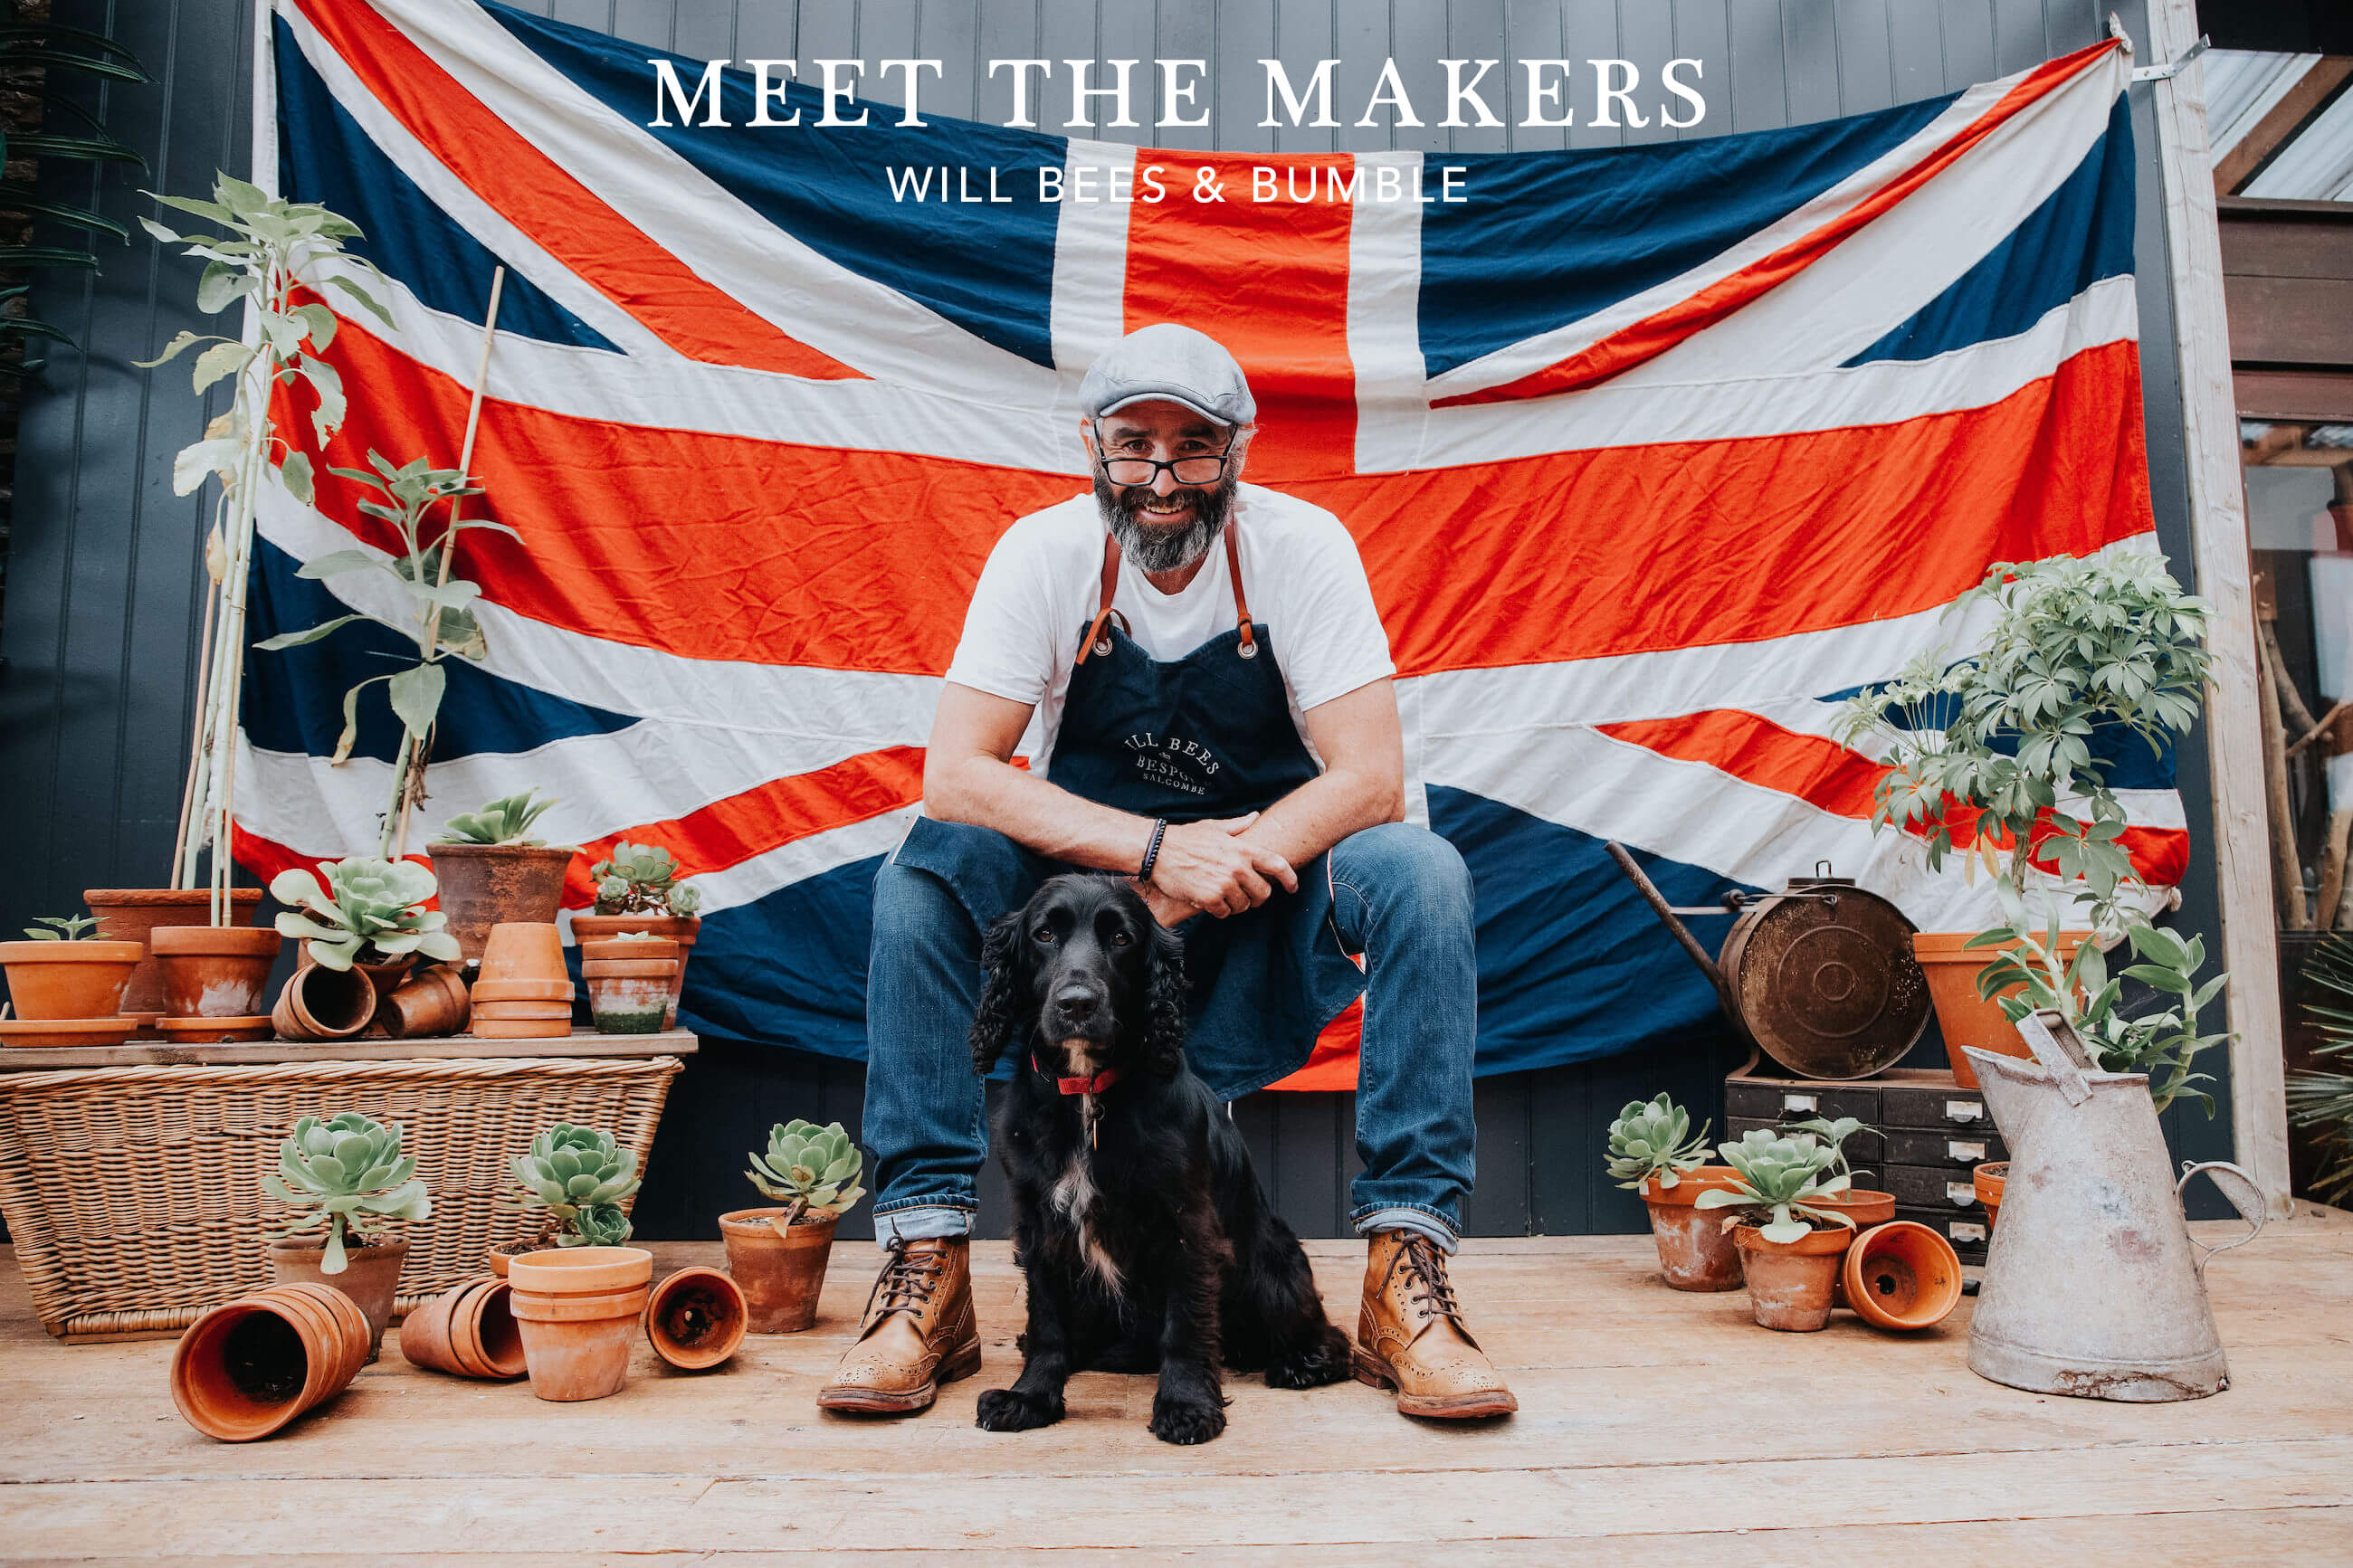 Meet the Makers - Will Bees & his dog, Bumble